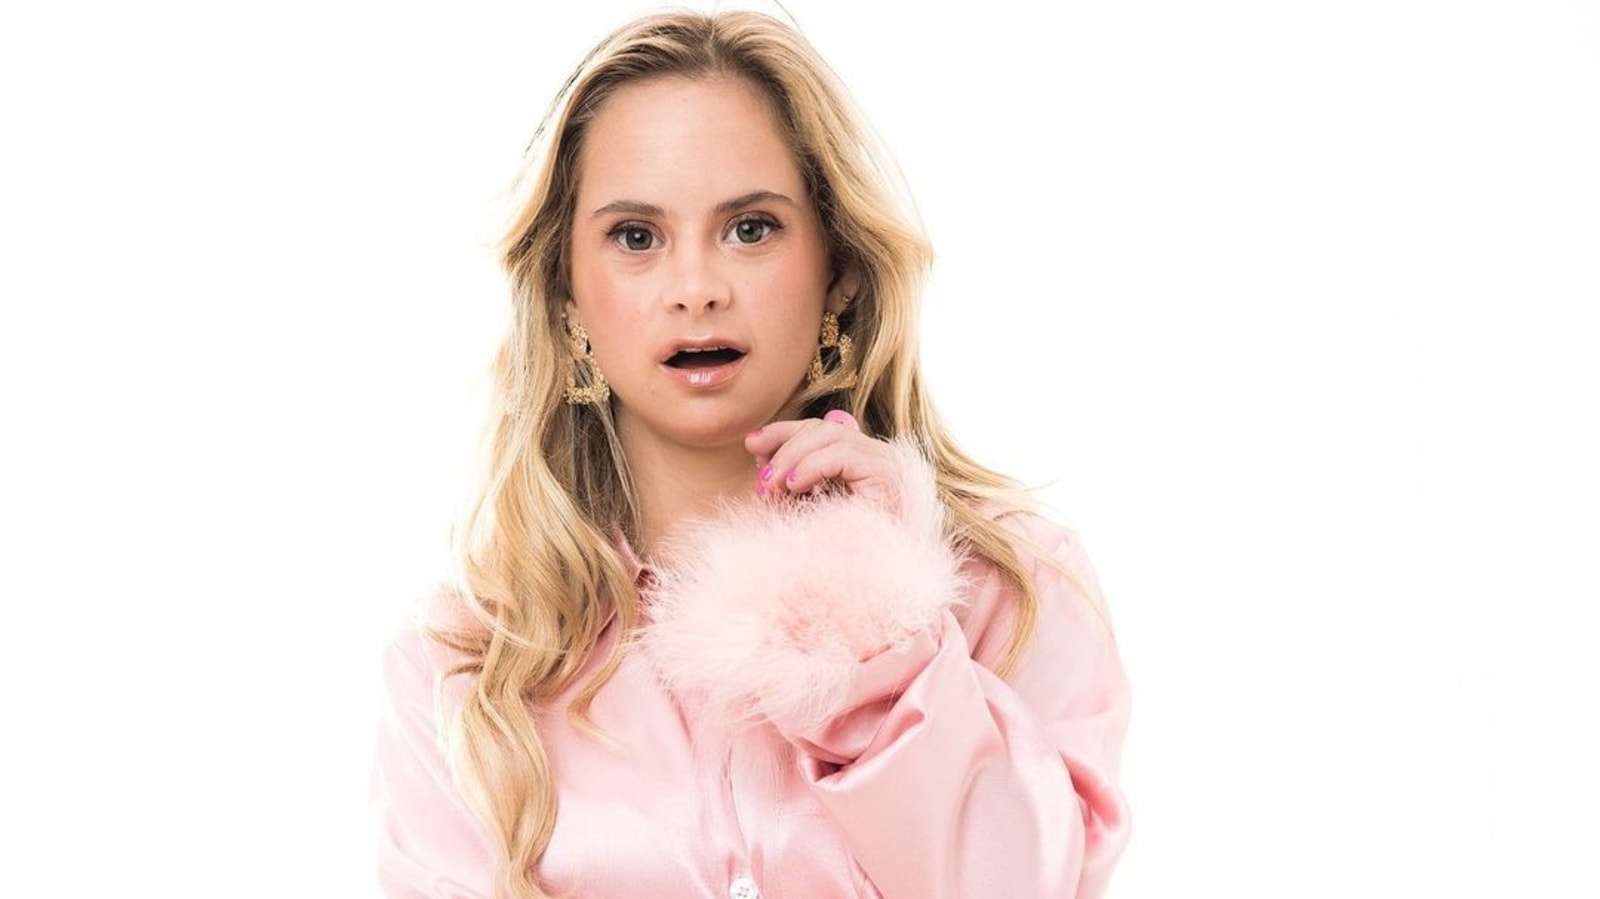 Victoria's Secret campaign features first model with Down syndrome